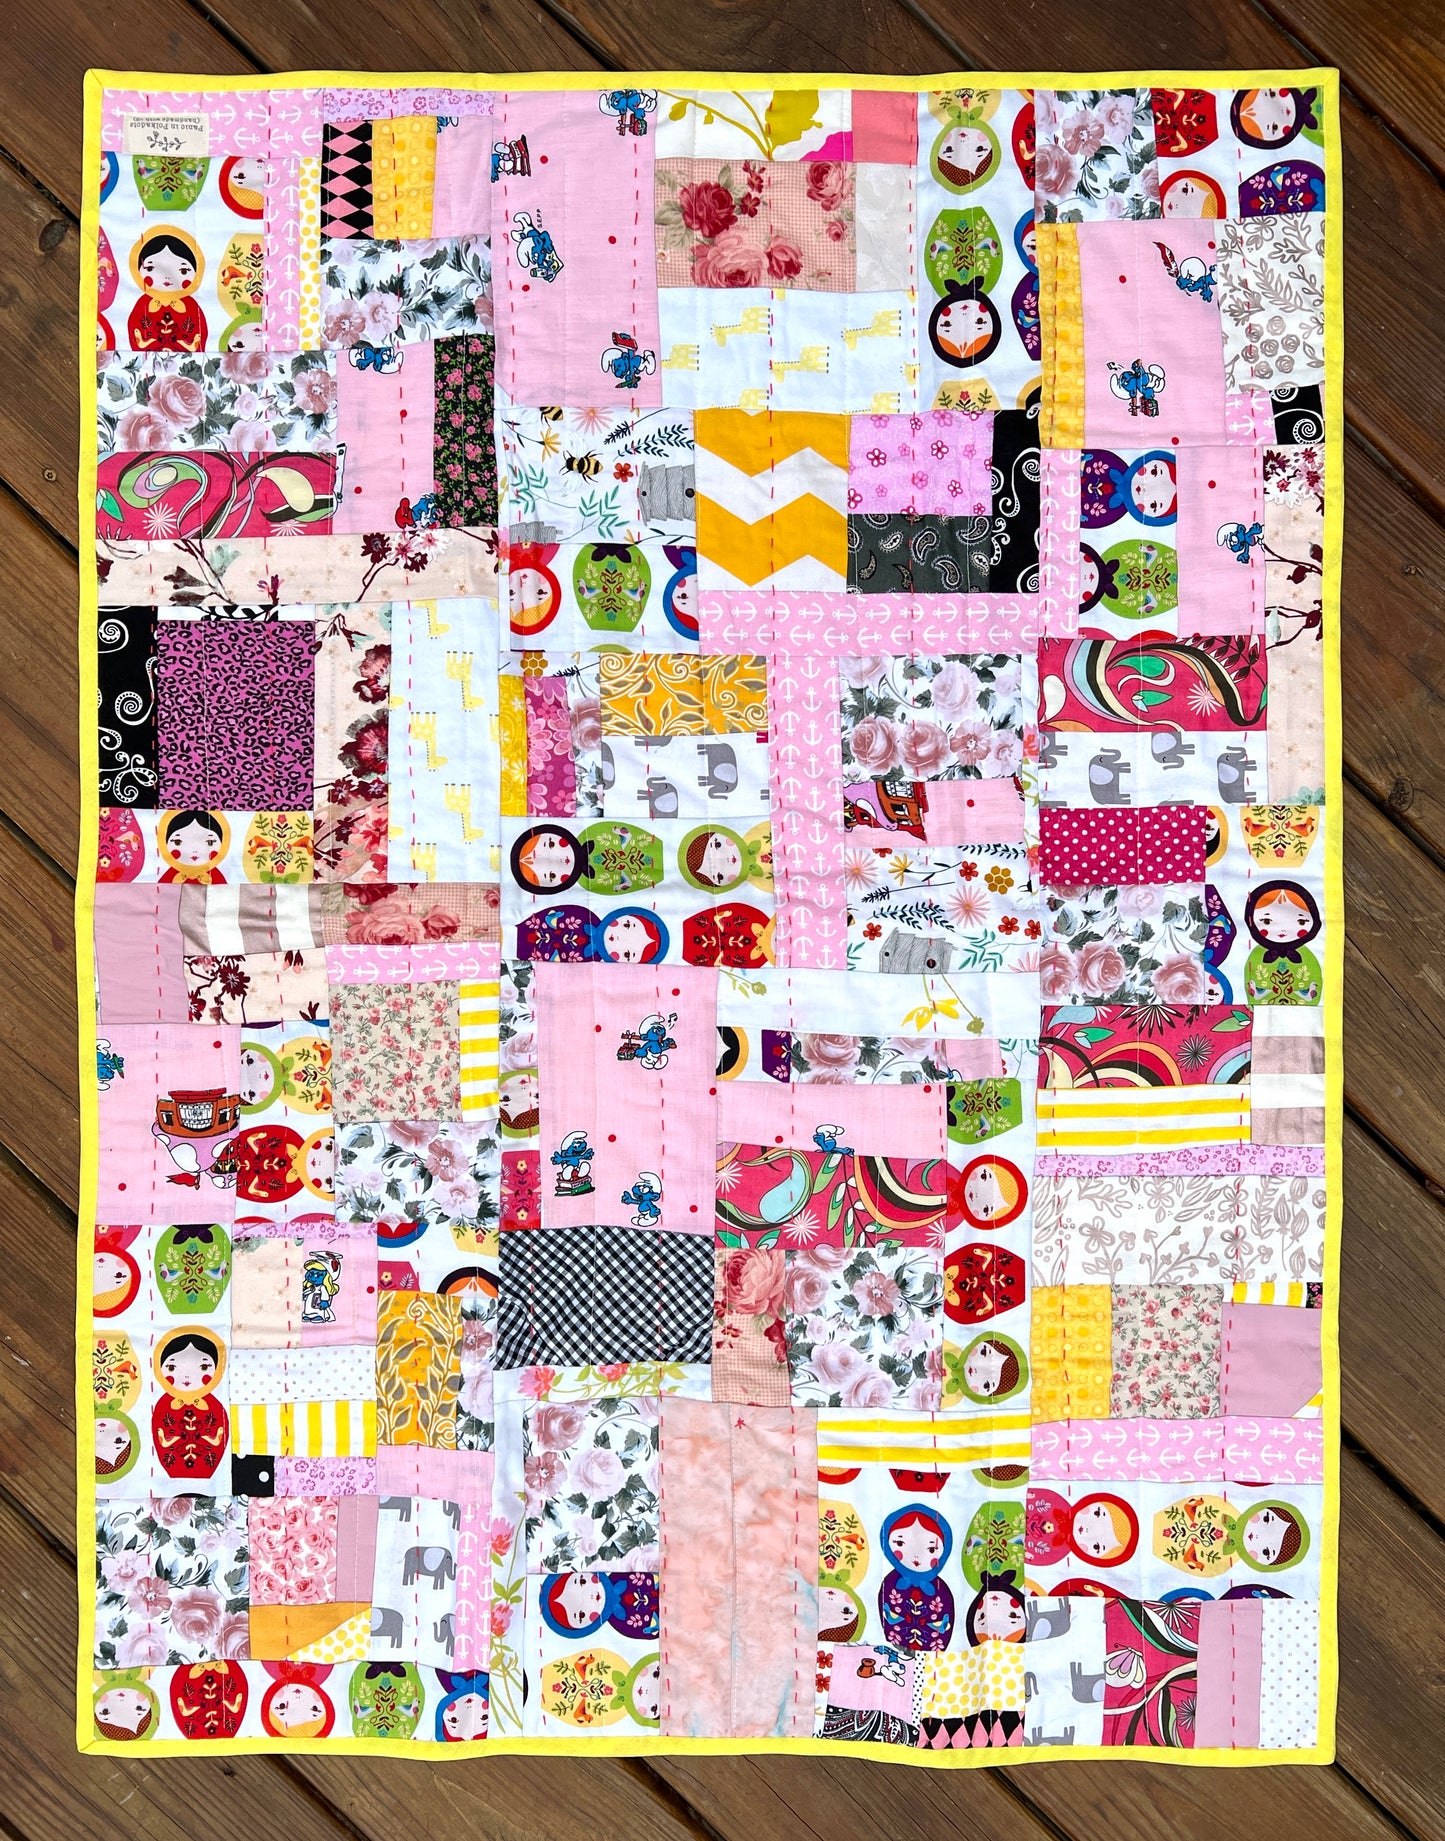 A very vibrant yellow and pink scrappy quilt, outside against a wood deck background